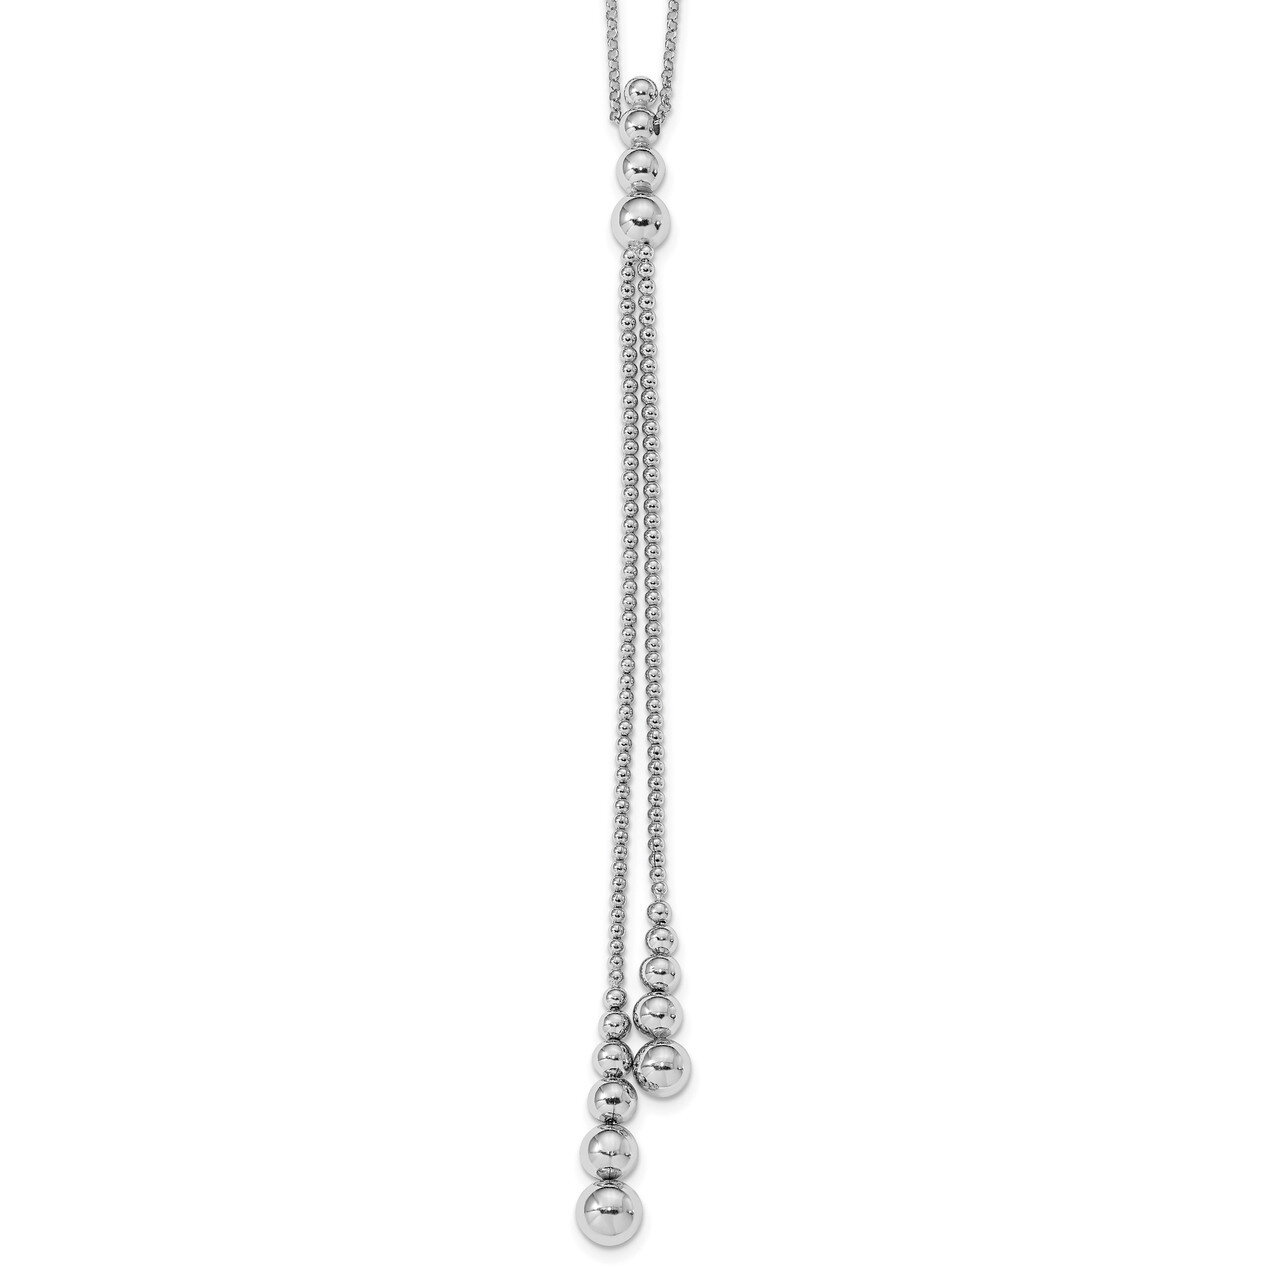 Beaded Tassle with 1.5 inch extender Necklace Sterling Silver Rhodium-plated Polished HB-QLF1070-16